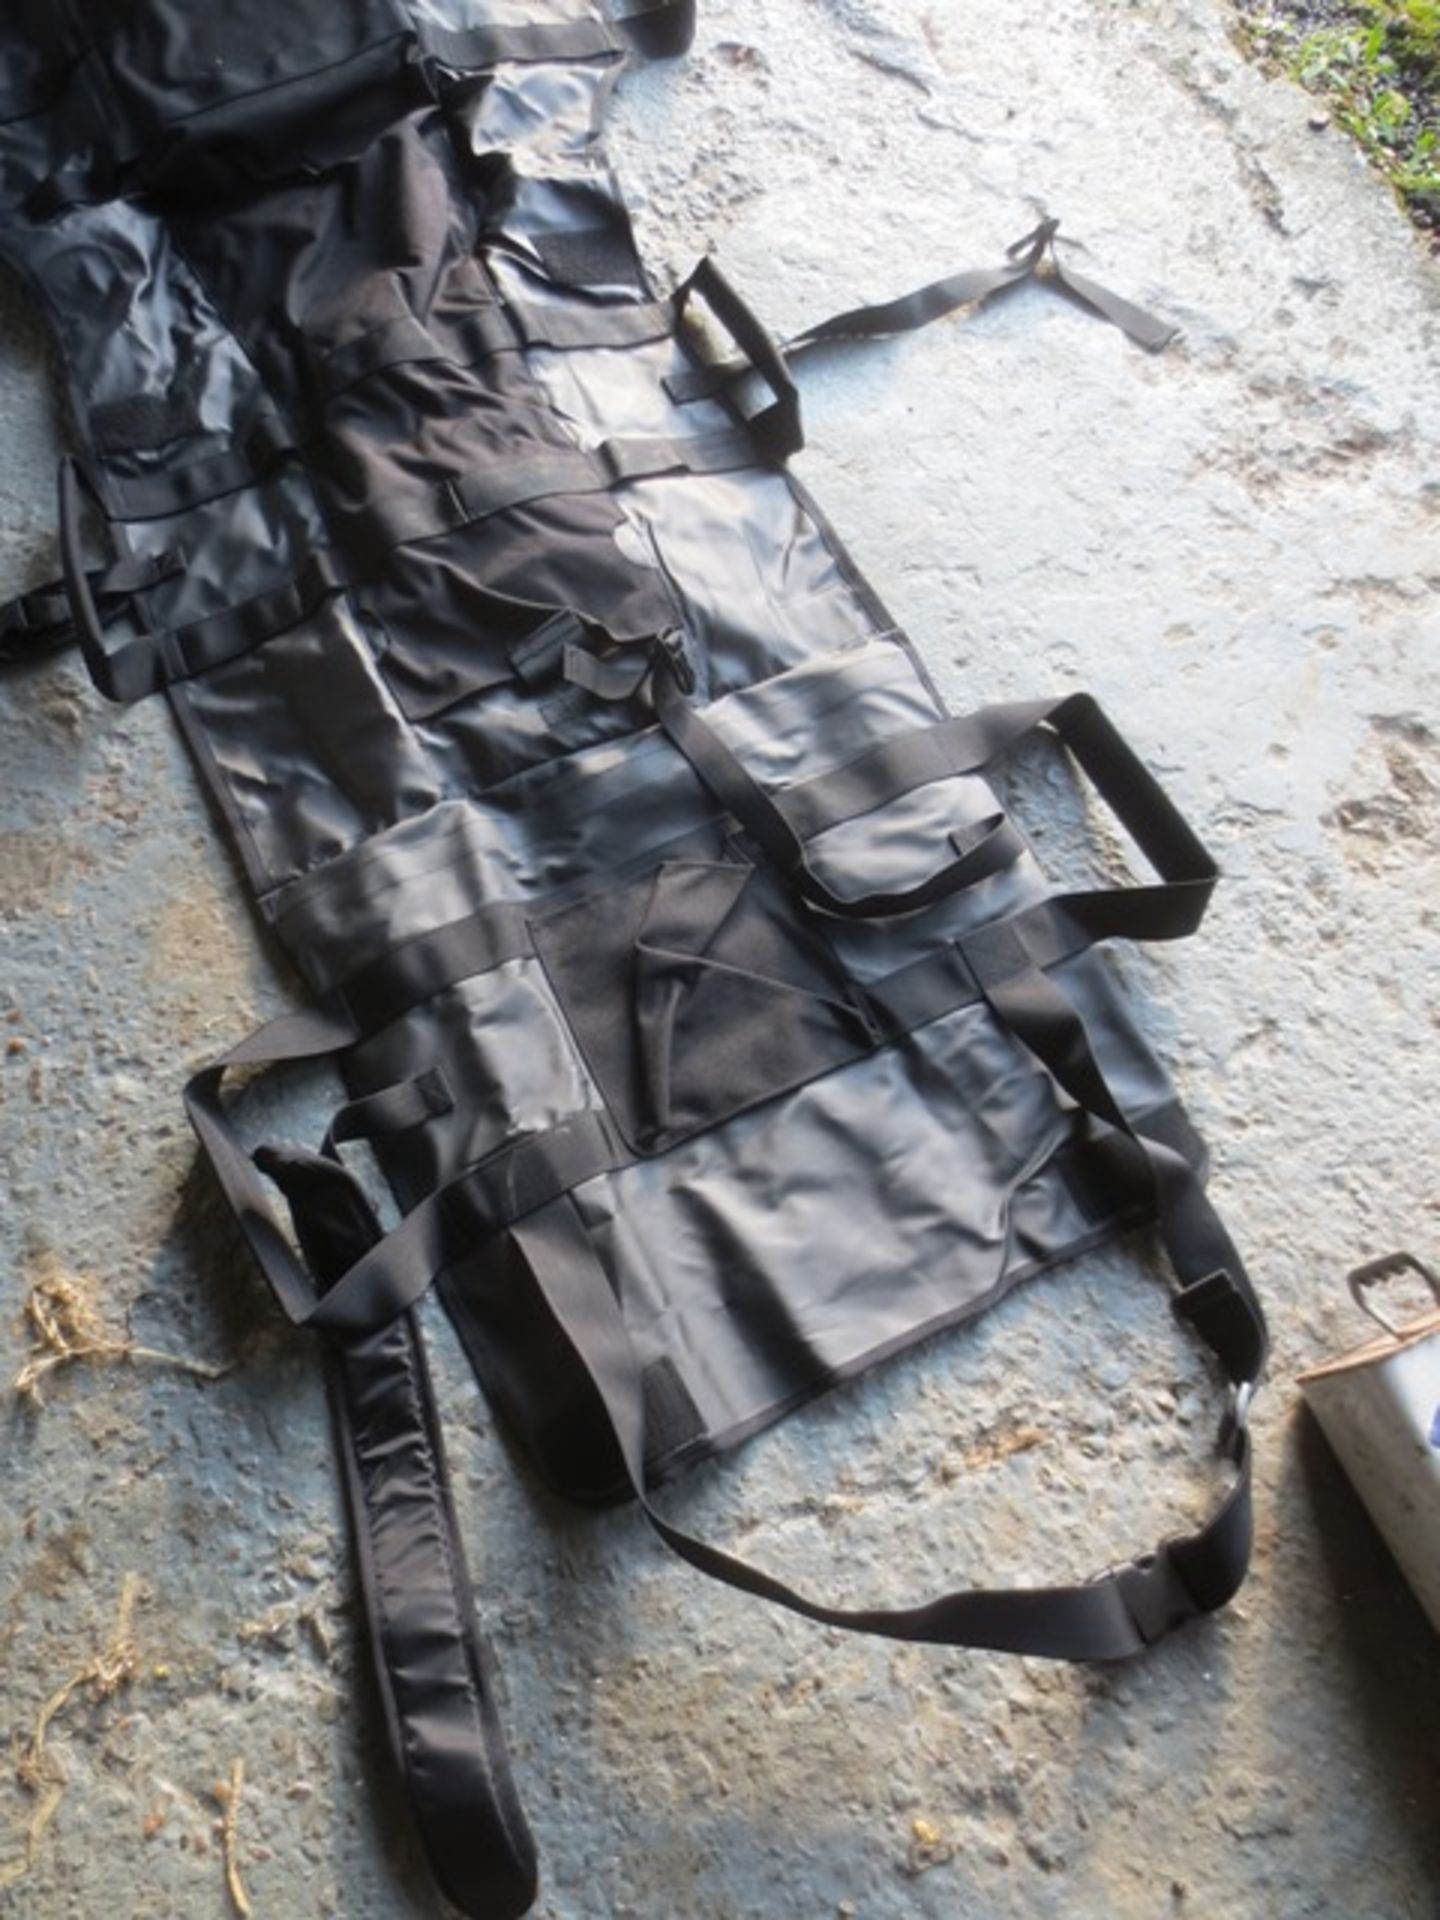 Black Rucksack Stretcher Systems (RSS) Day sack/grab bag, fold out rucksack stretcher, with - Image 5 of 9